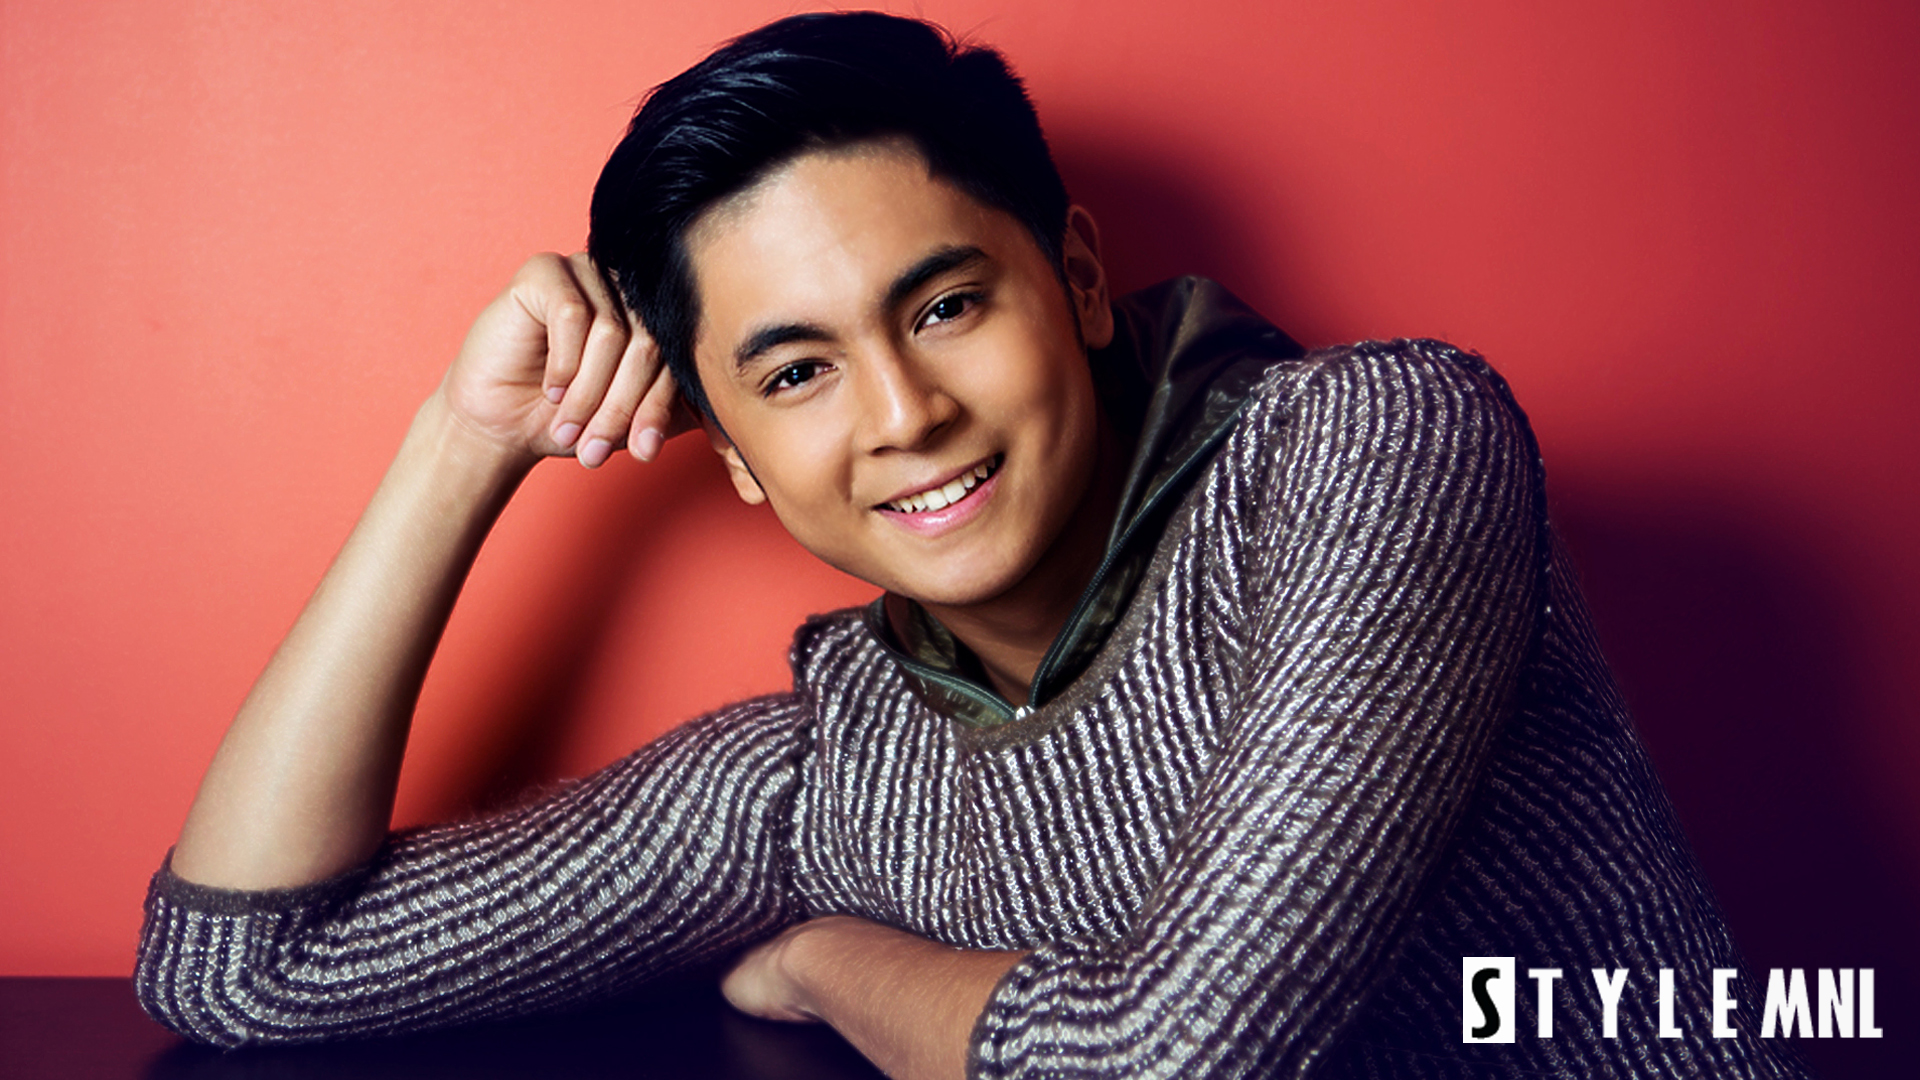 Miguel Tanfelix for STYLEMNL